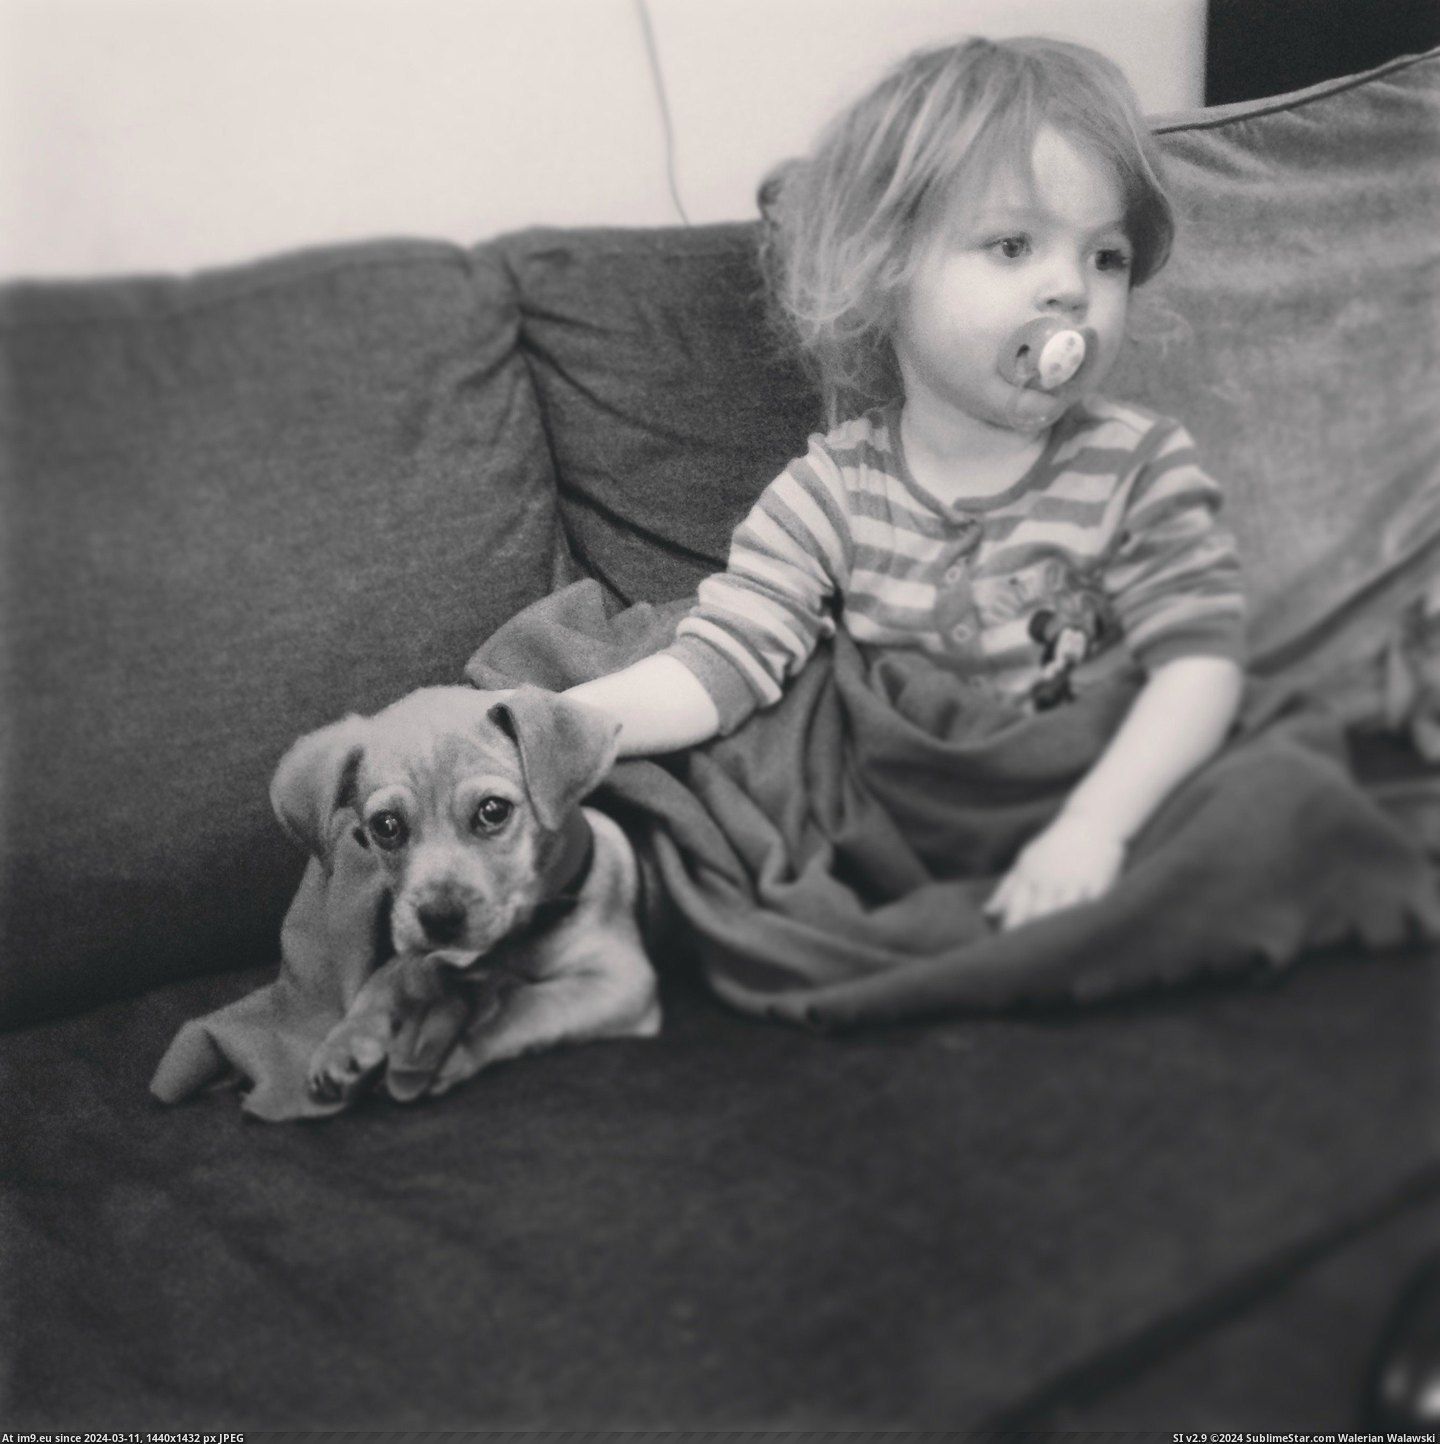 #Thought #Meet #Mad #Mollie #Puggle #Jack #Pup #Toddler [Aww] Everyone thought I was mad getting a puggle pup when I have a toddler already.... everyone meet Mollie and Jack. 1 Pic. (Image of album My r/AWW favs))